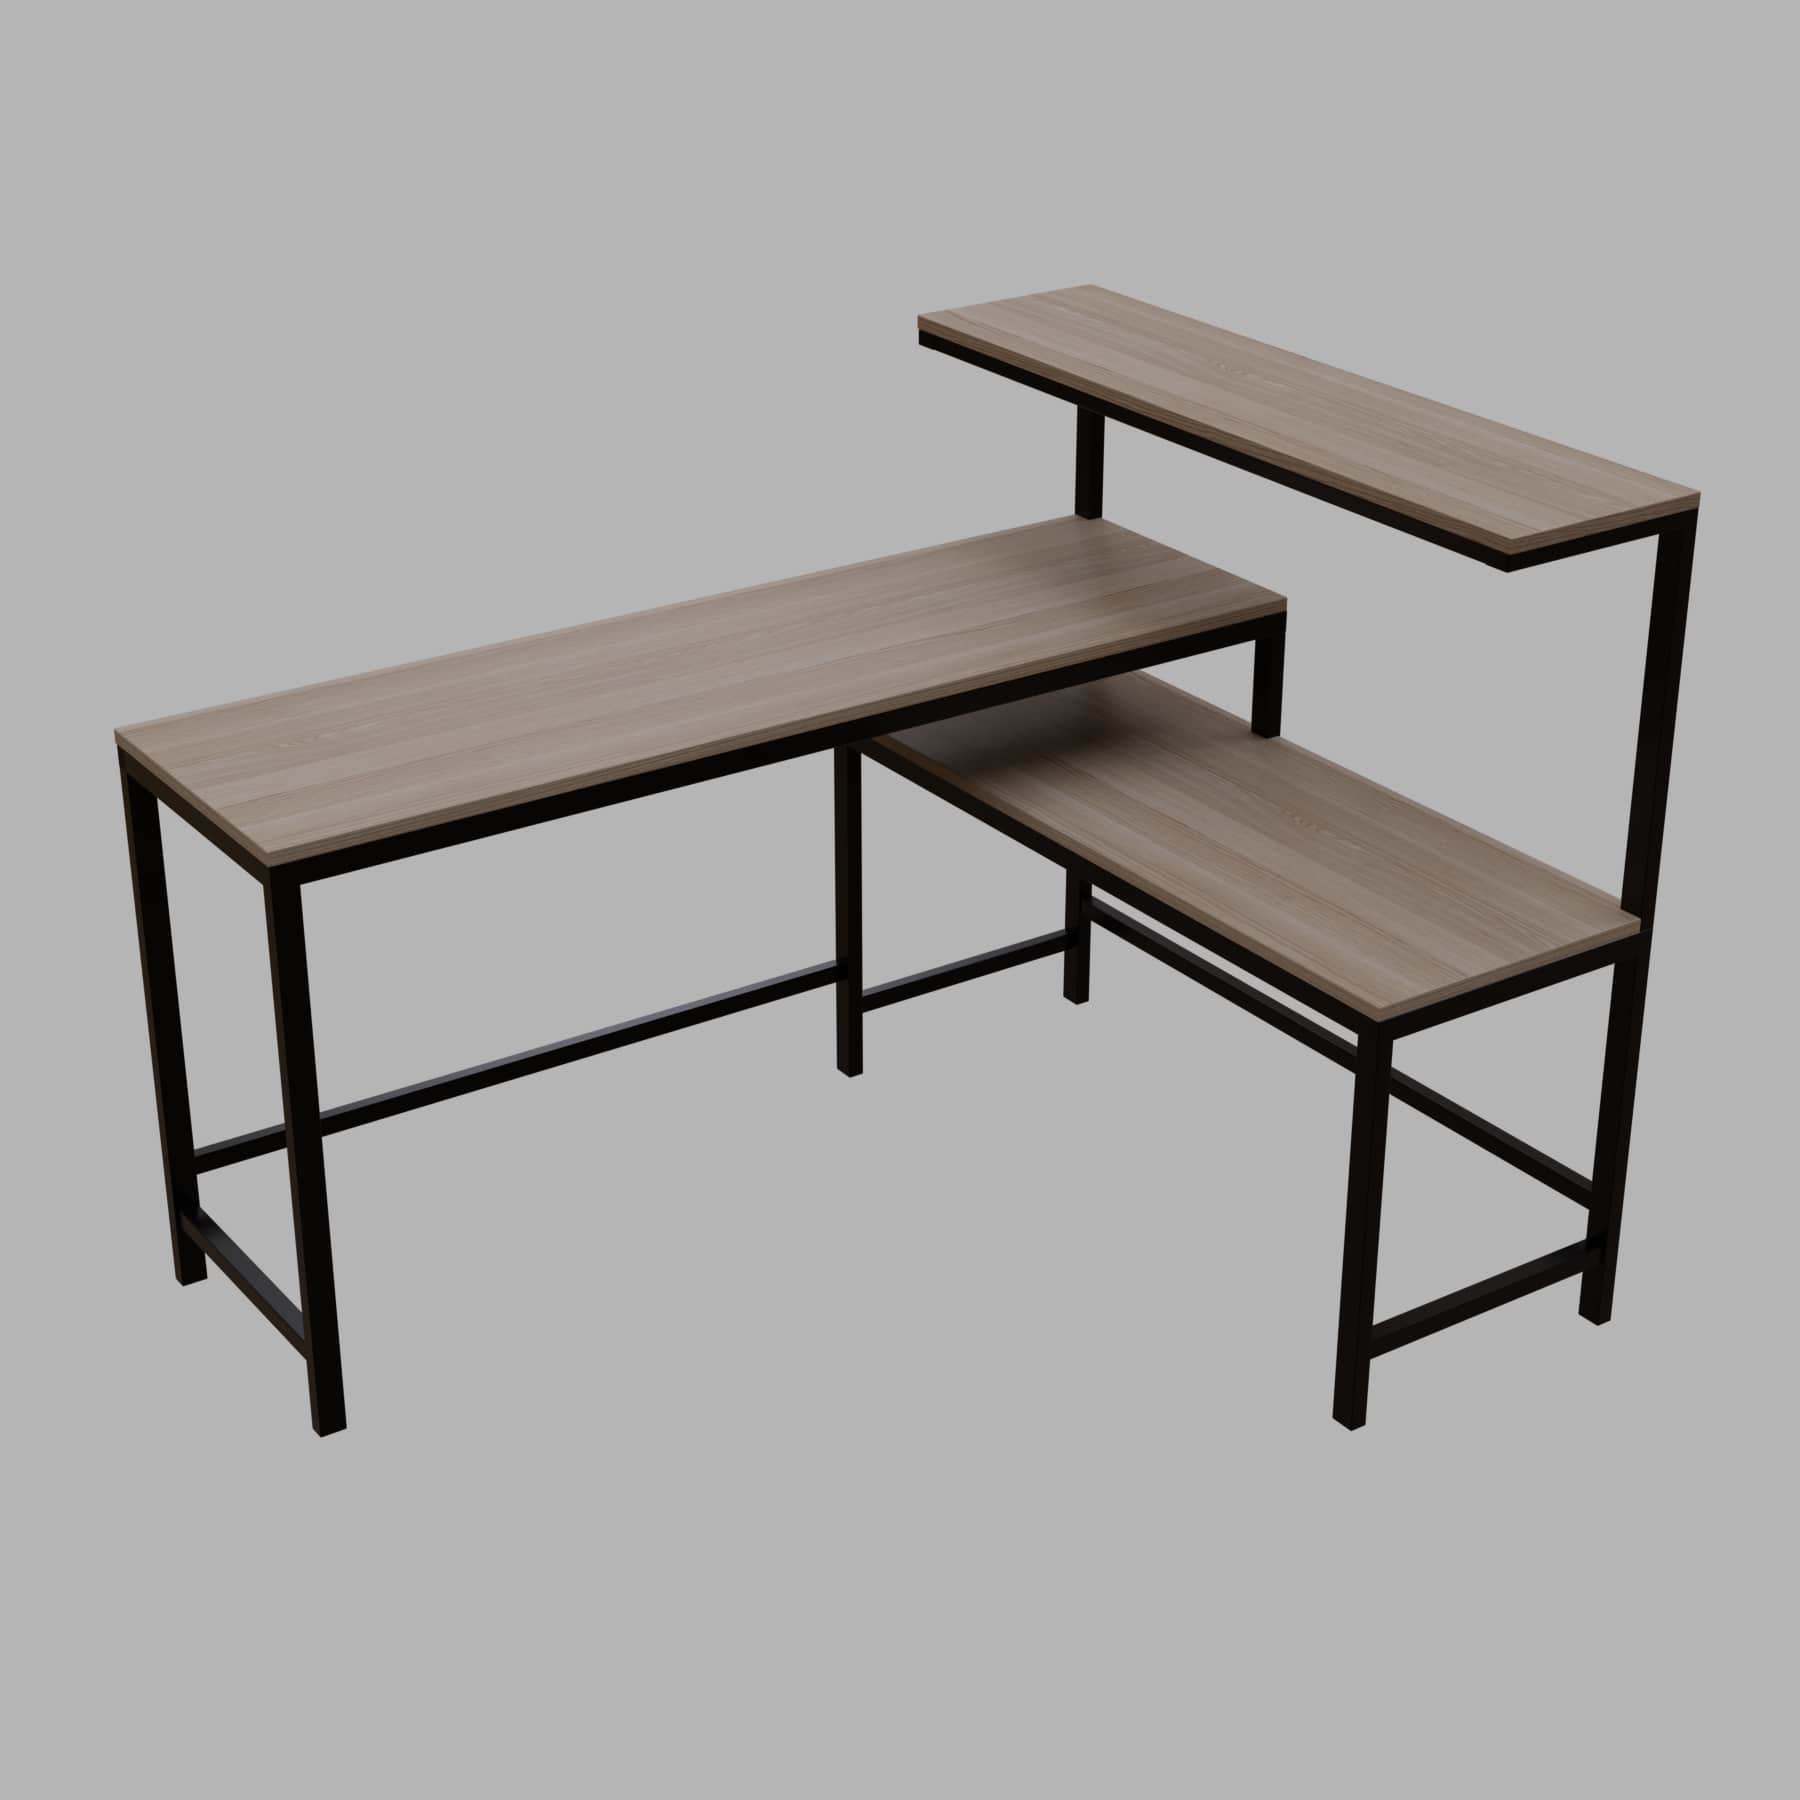 Mitsuko L Shaped Study Table with storage Design in Wenge Color